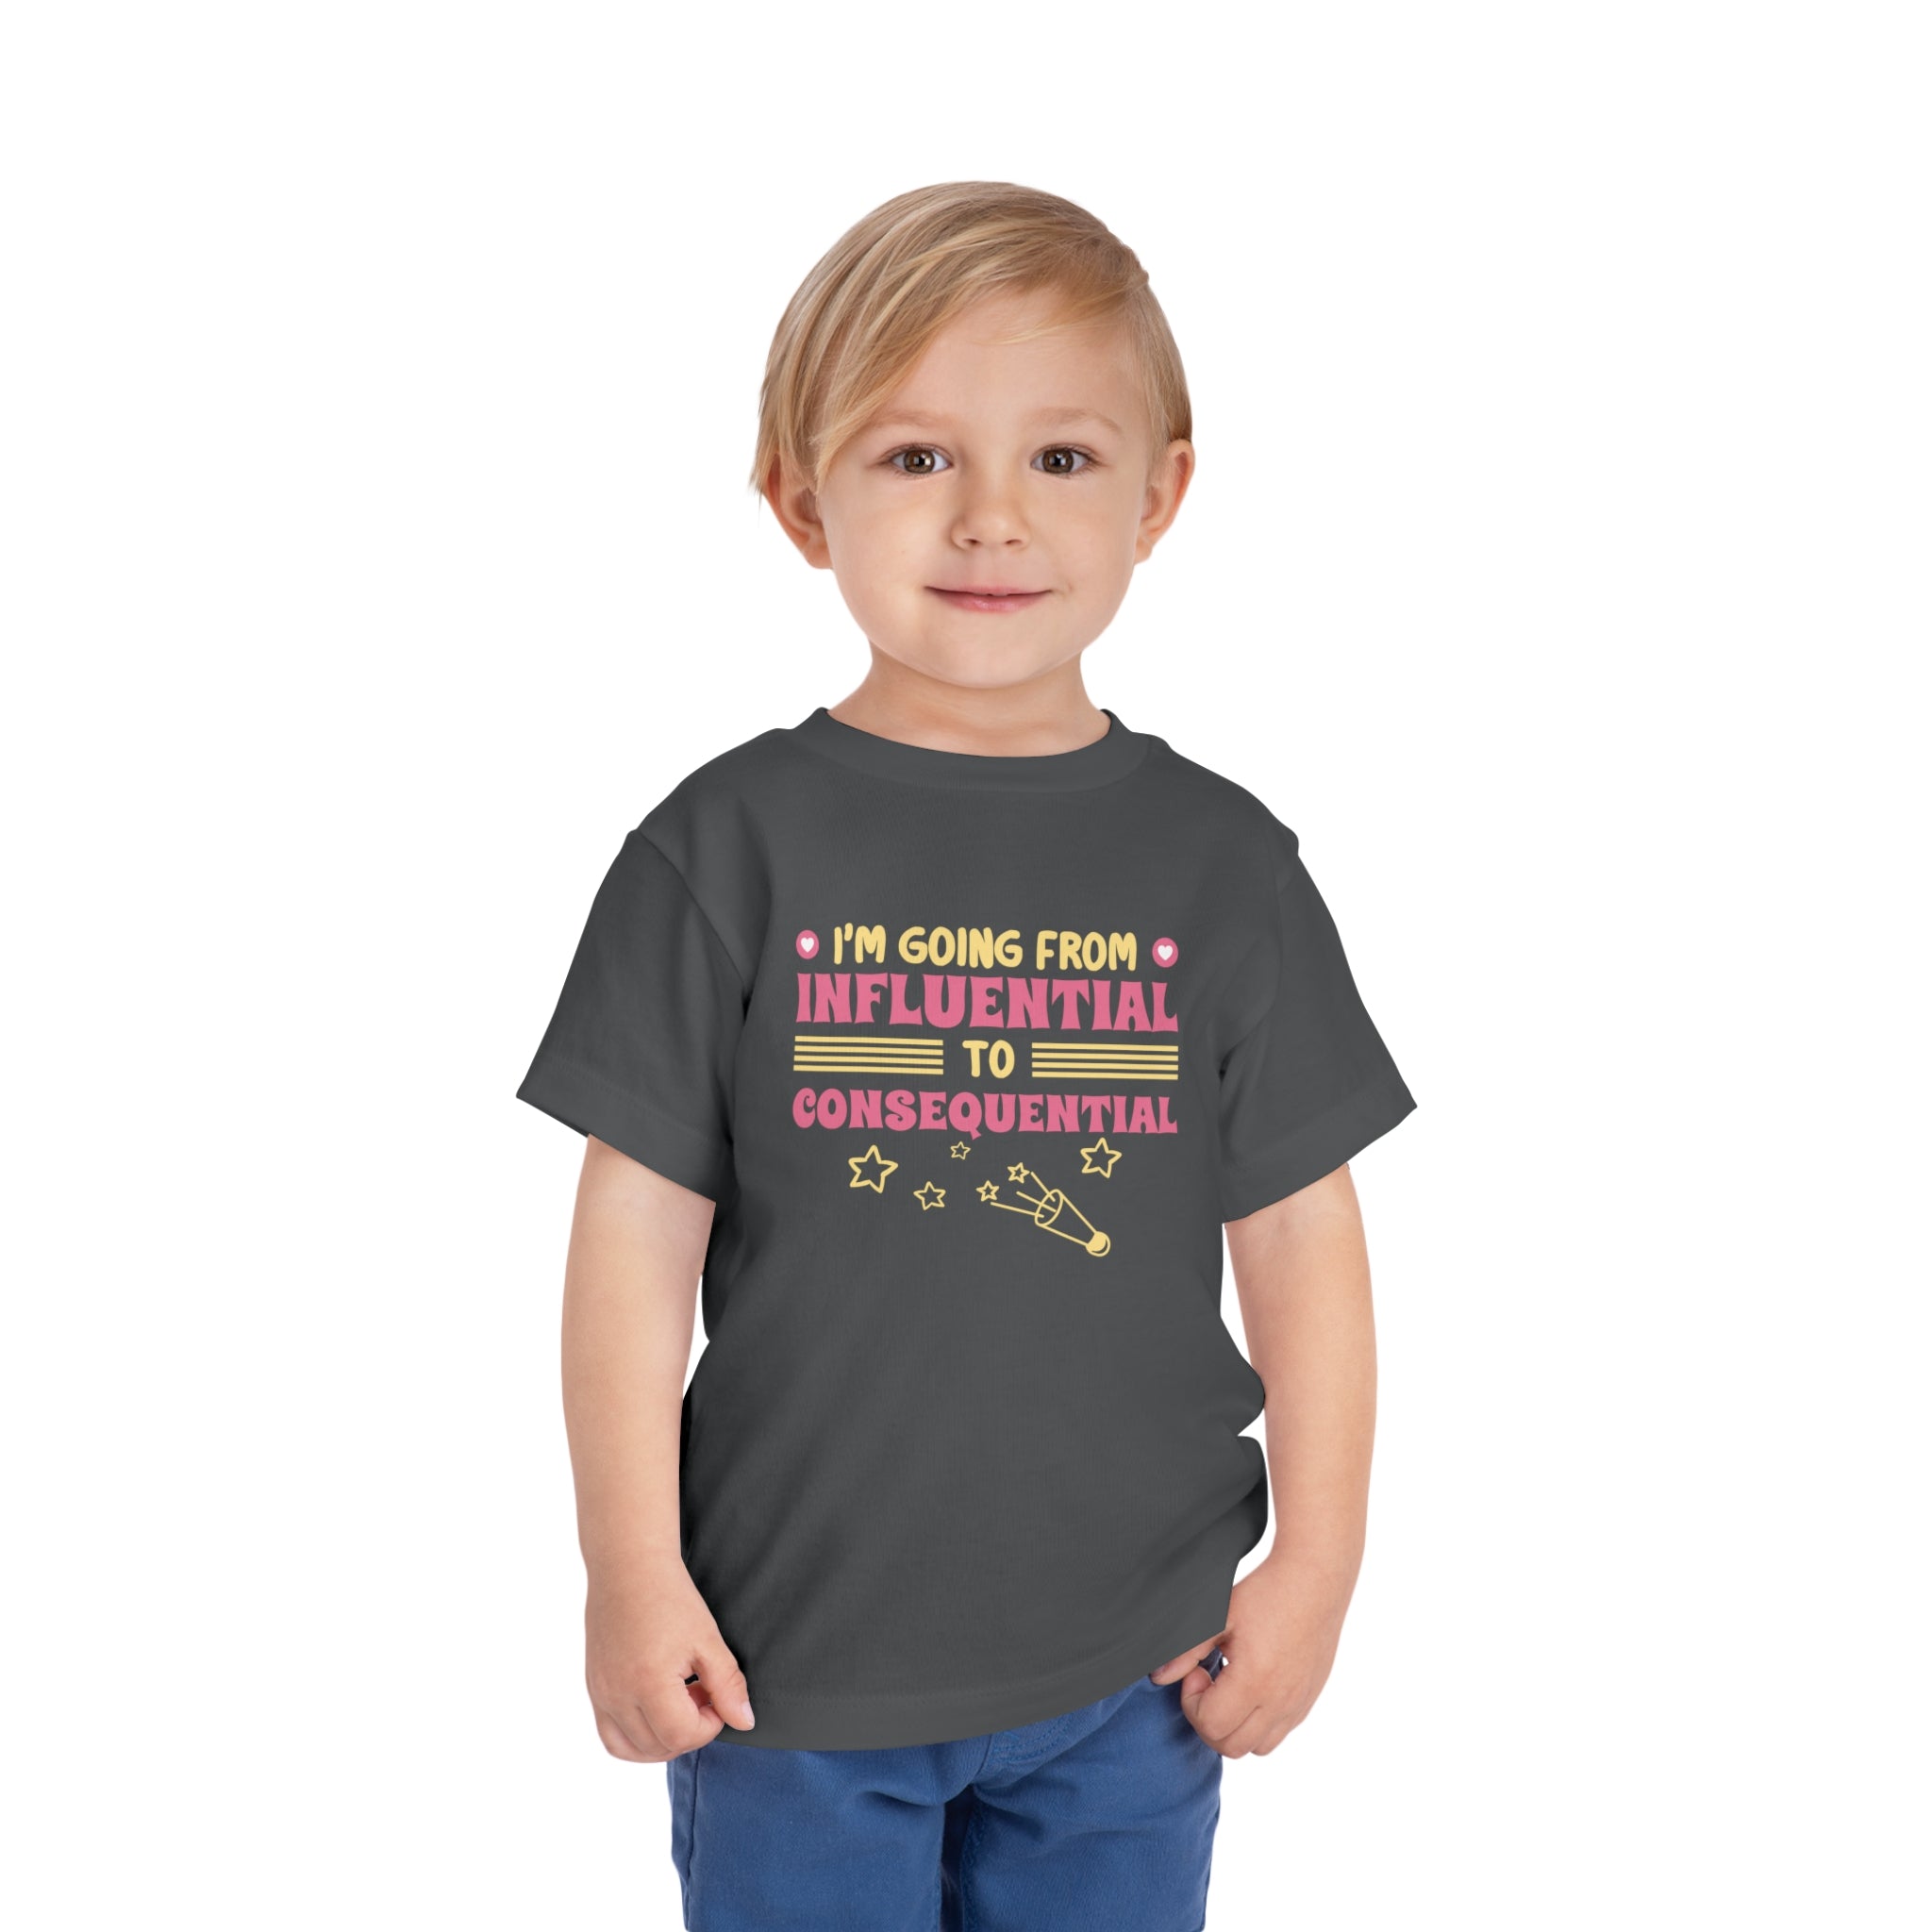 From Influential to Consequential [Toddler Tee]